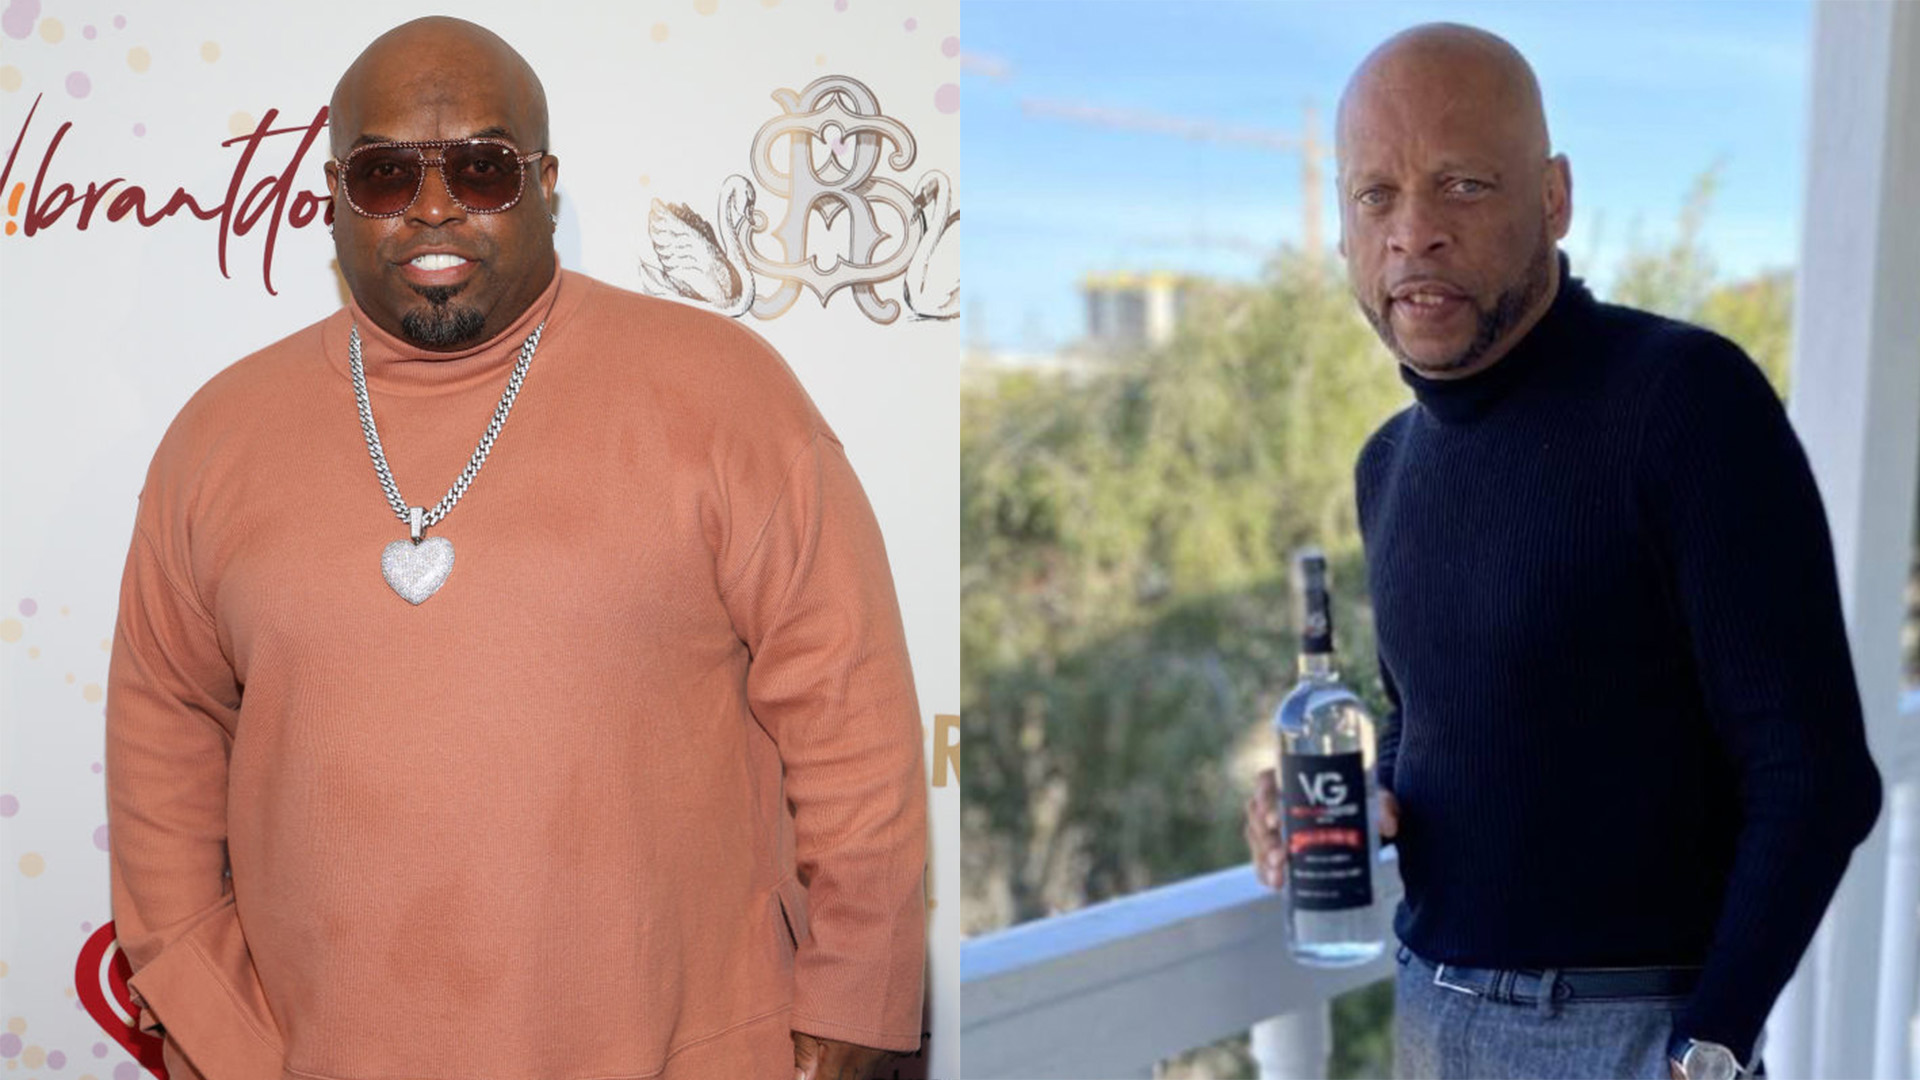 Cee Lo Green Enters Spirits Industry, Partners With The Owner Behind Fort Lauderdale's First Black-Owned Distillery